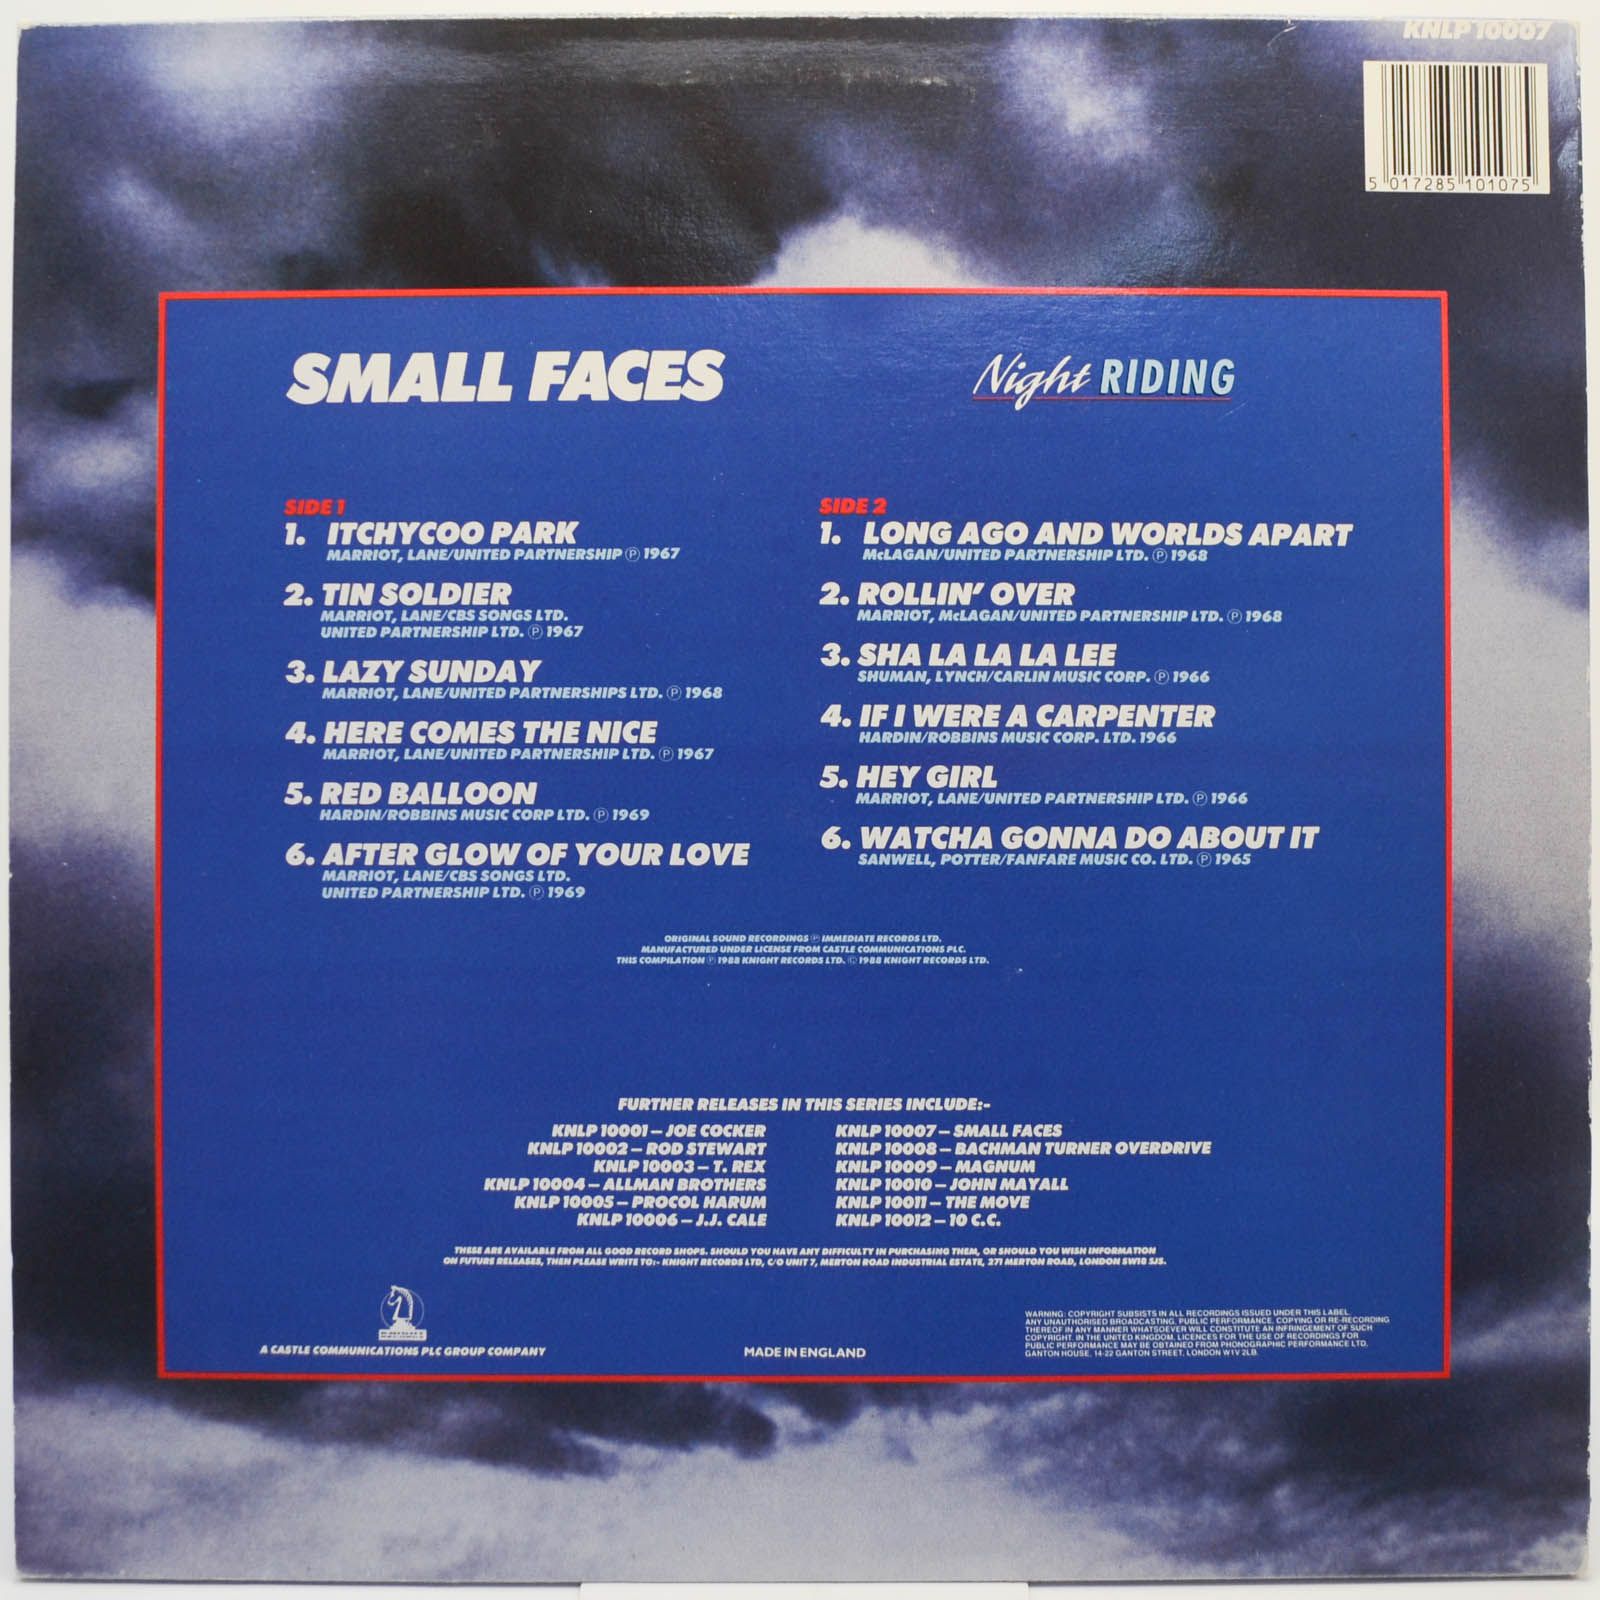 Small Faces — Night Riding (UK), 1988